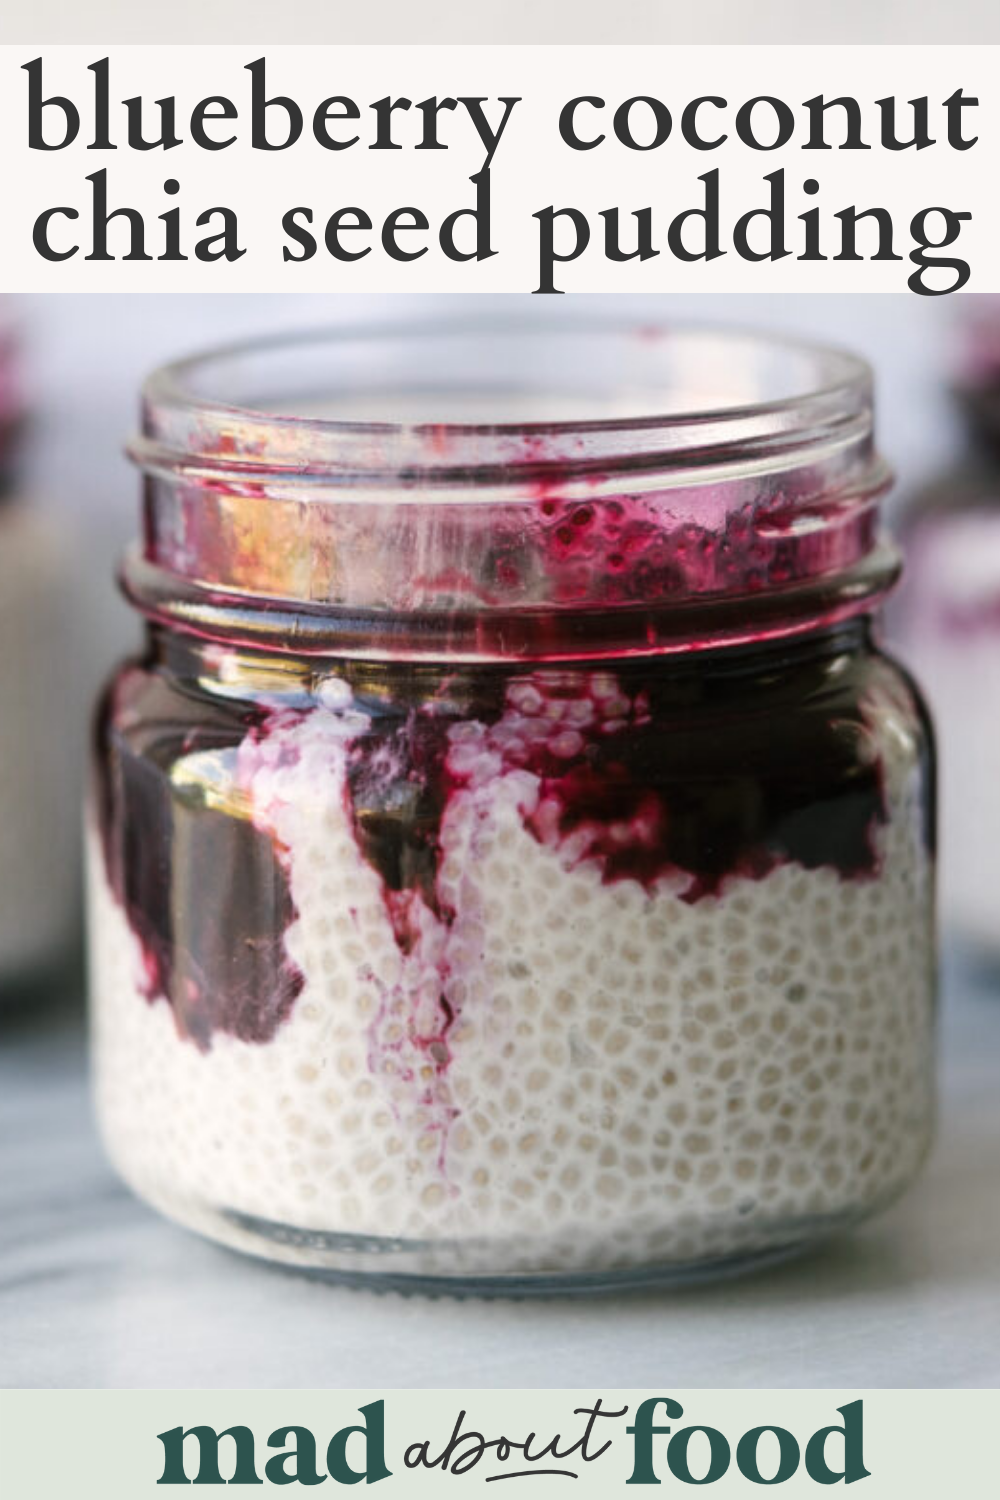 Image for pinning Blueberry coconut chia seed pudding recipe on pinterest